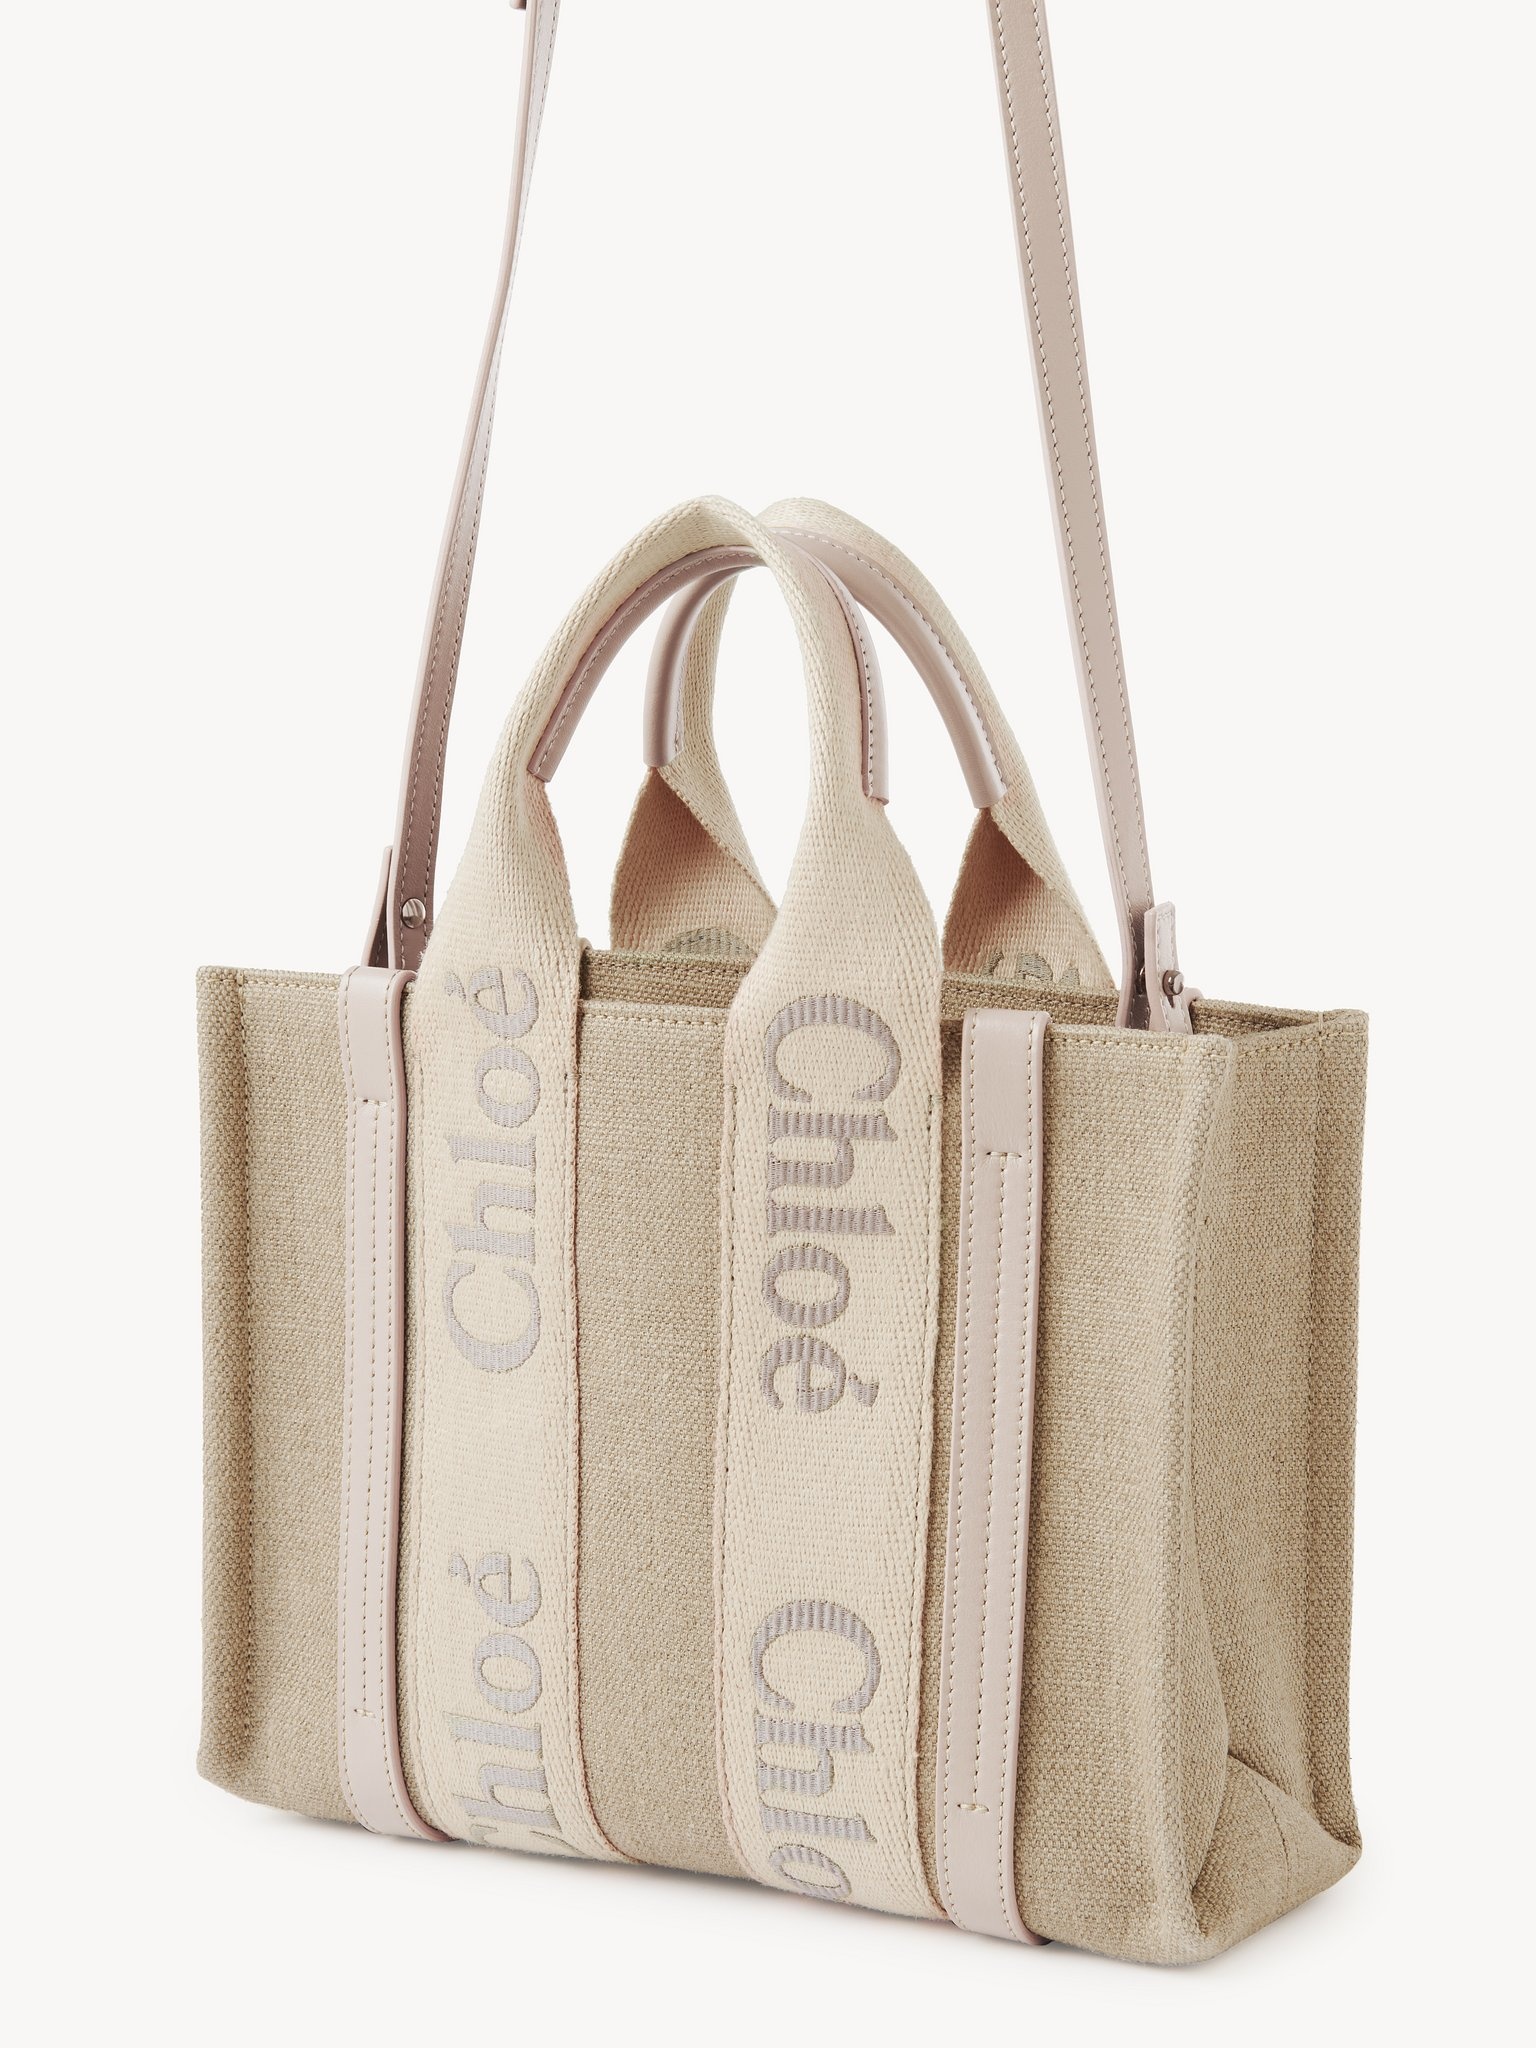 SMALL WOODY TOTE BAG IN LINEN - 4